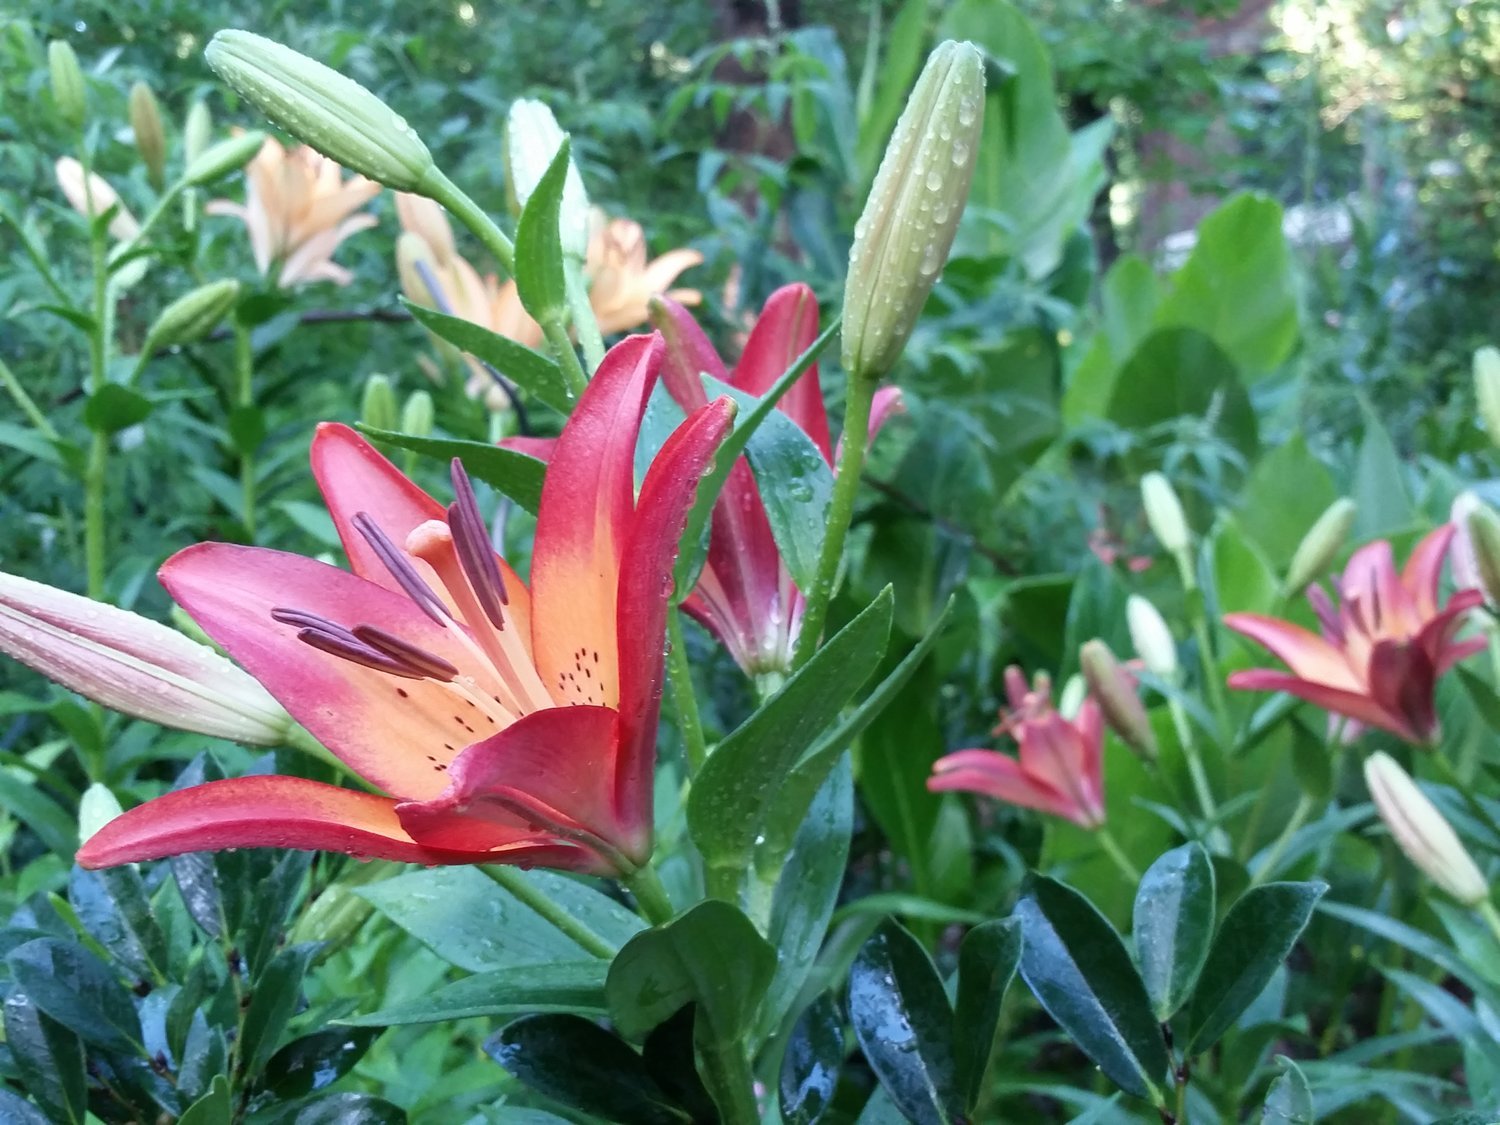 Royal Sunset, one of the most striking of garden lilies